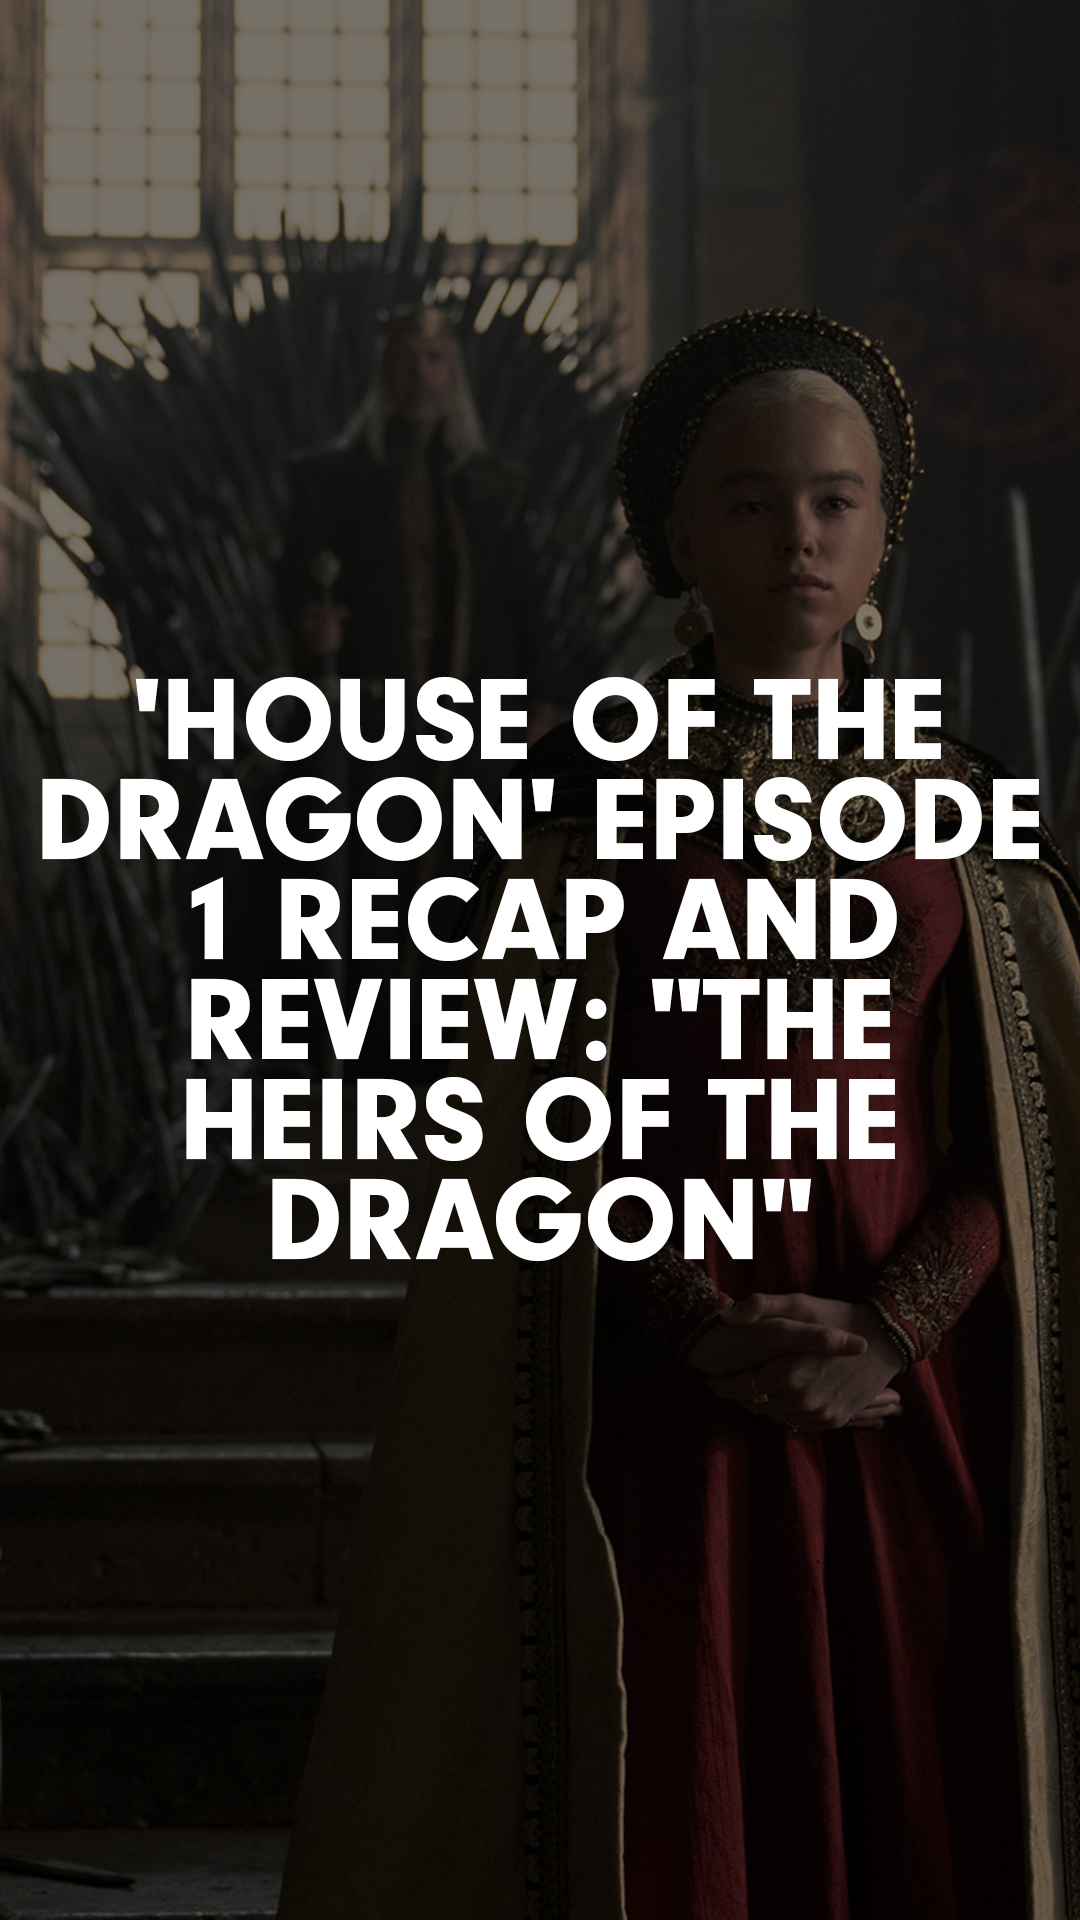 House Of The Dragon' Episode 1 Recap And Review: The Heirs Of The